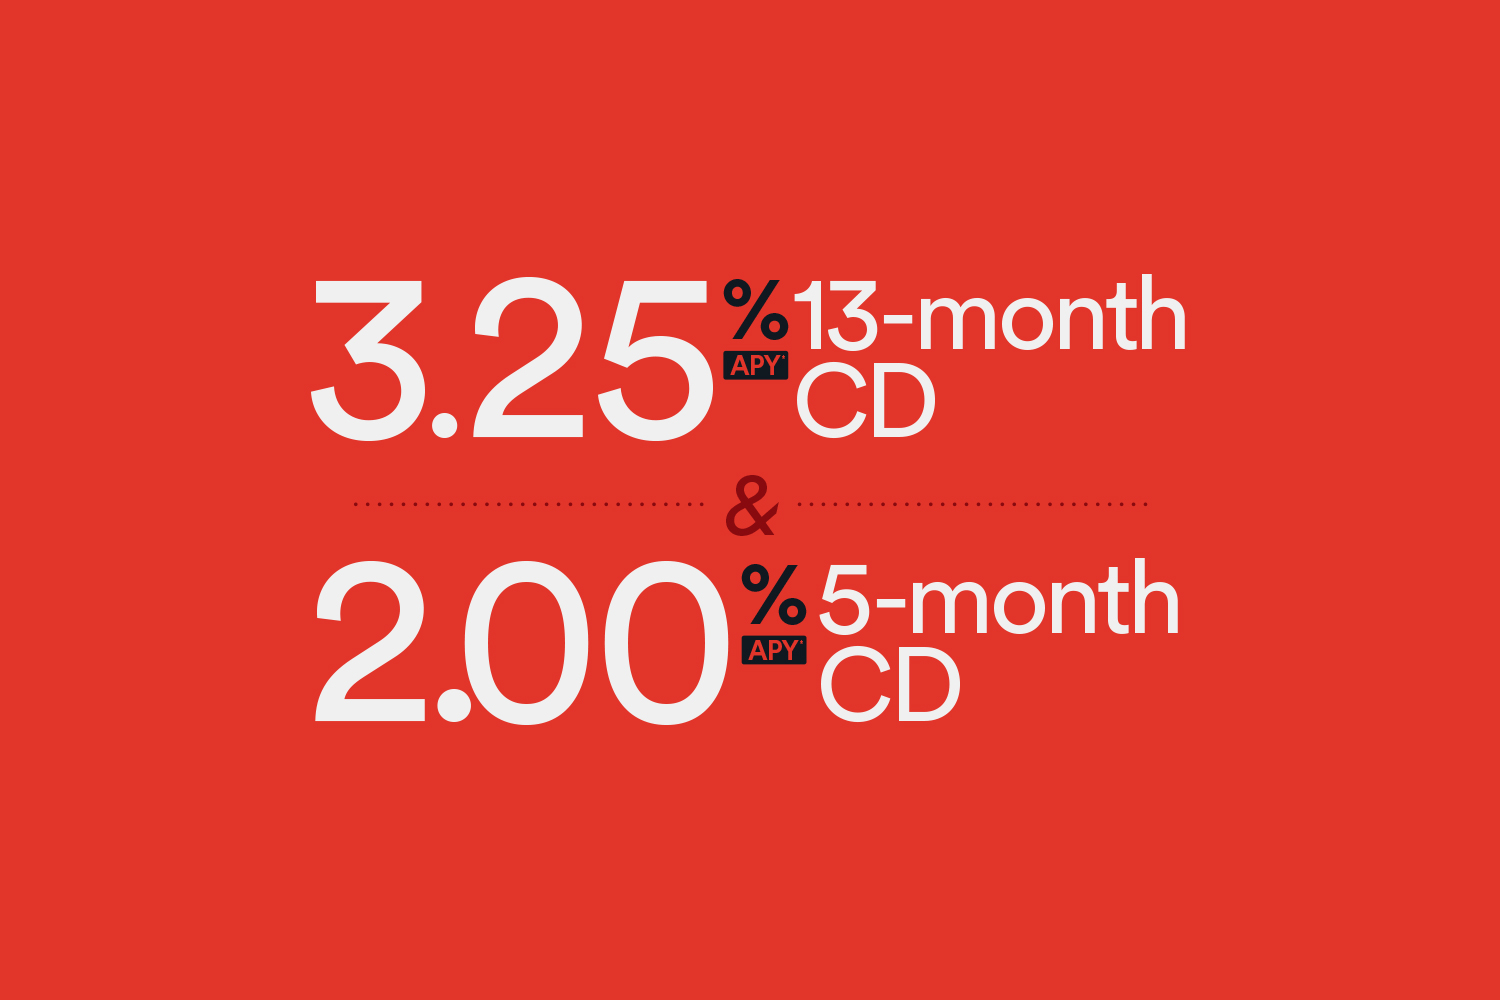 3.25% APY for a 13-month CD, 2.00% APY for a 5-month CD